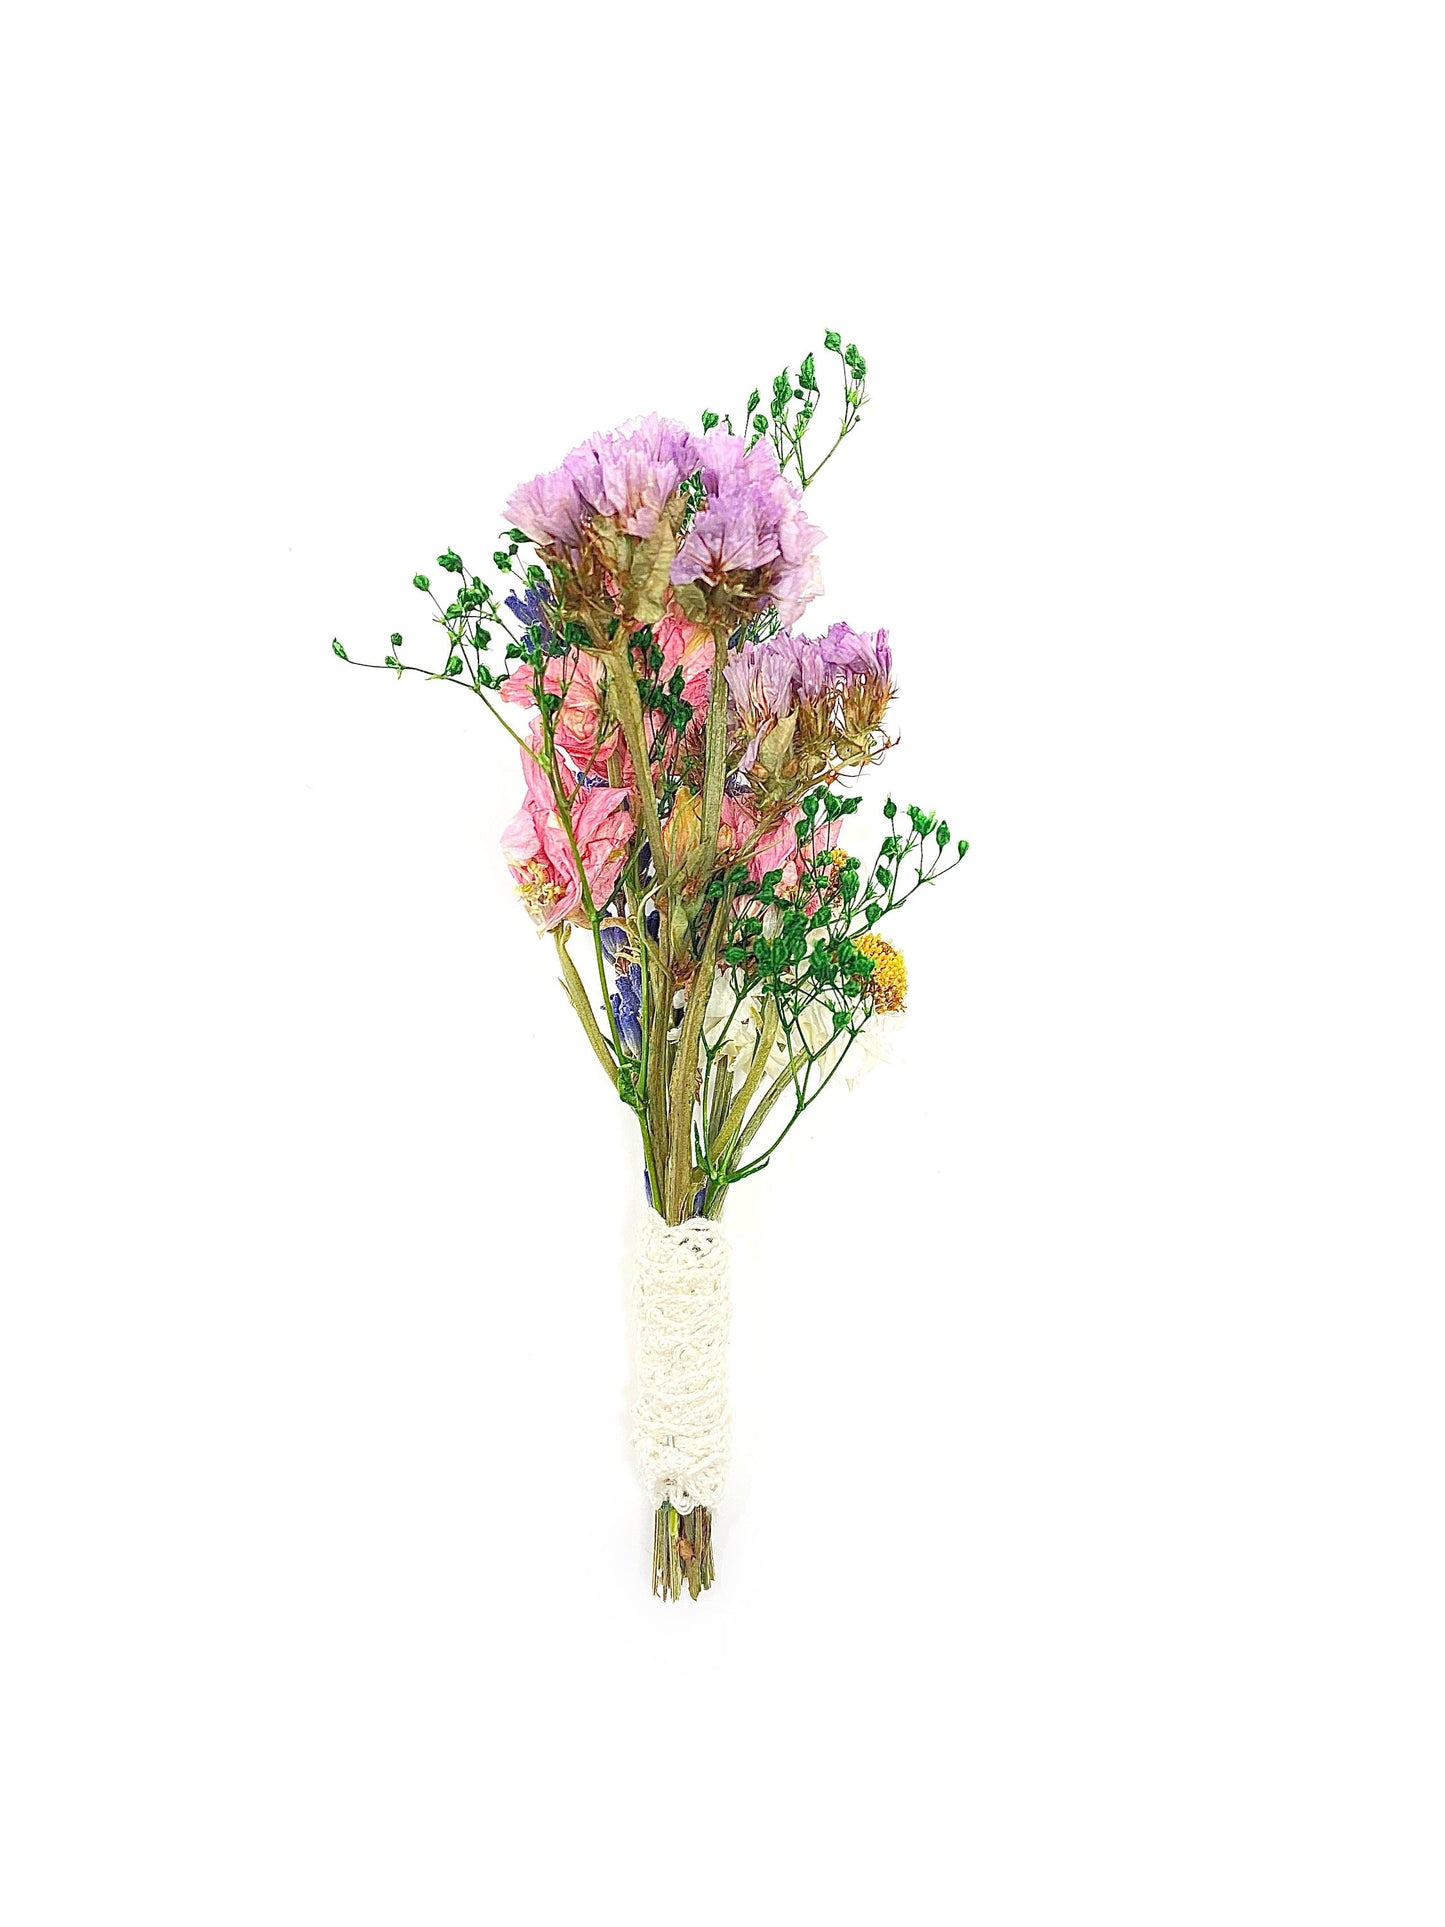 Boutonniere, Dried Flowers, Wedding Accessories, Preserved Floral, Bridal, Lavender, Decor, Purple and Pink, Ammobium